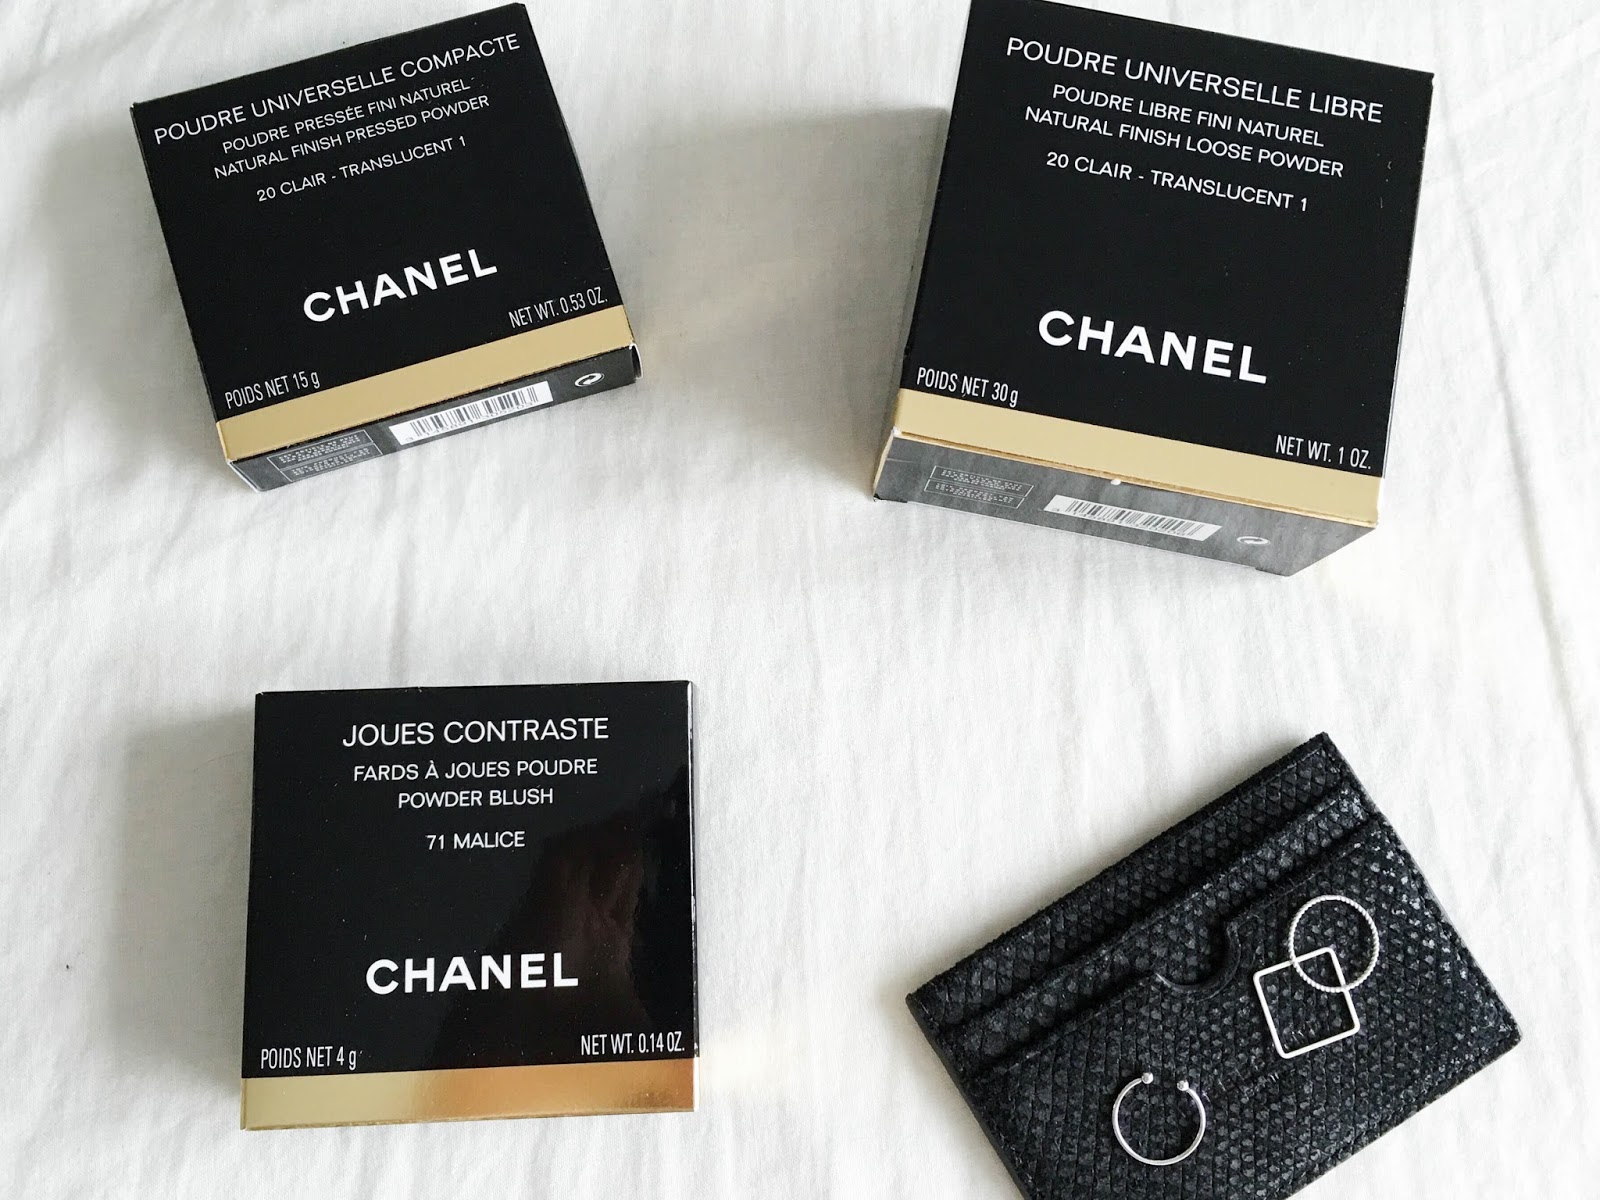 CHANEL MAKEUP REVIEW - FASHION EQUALS SCIENCE